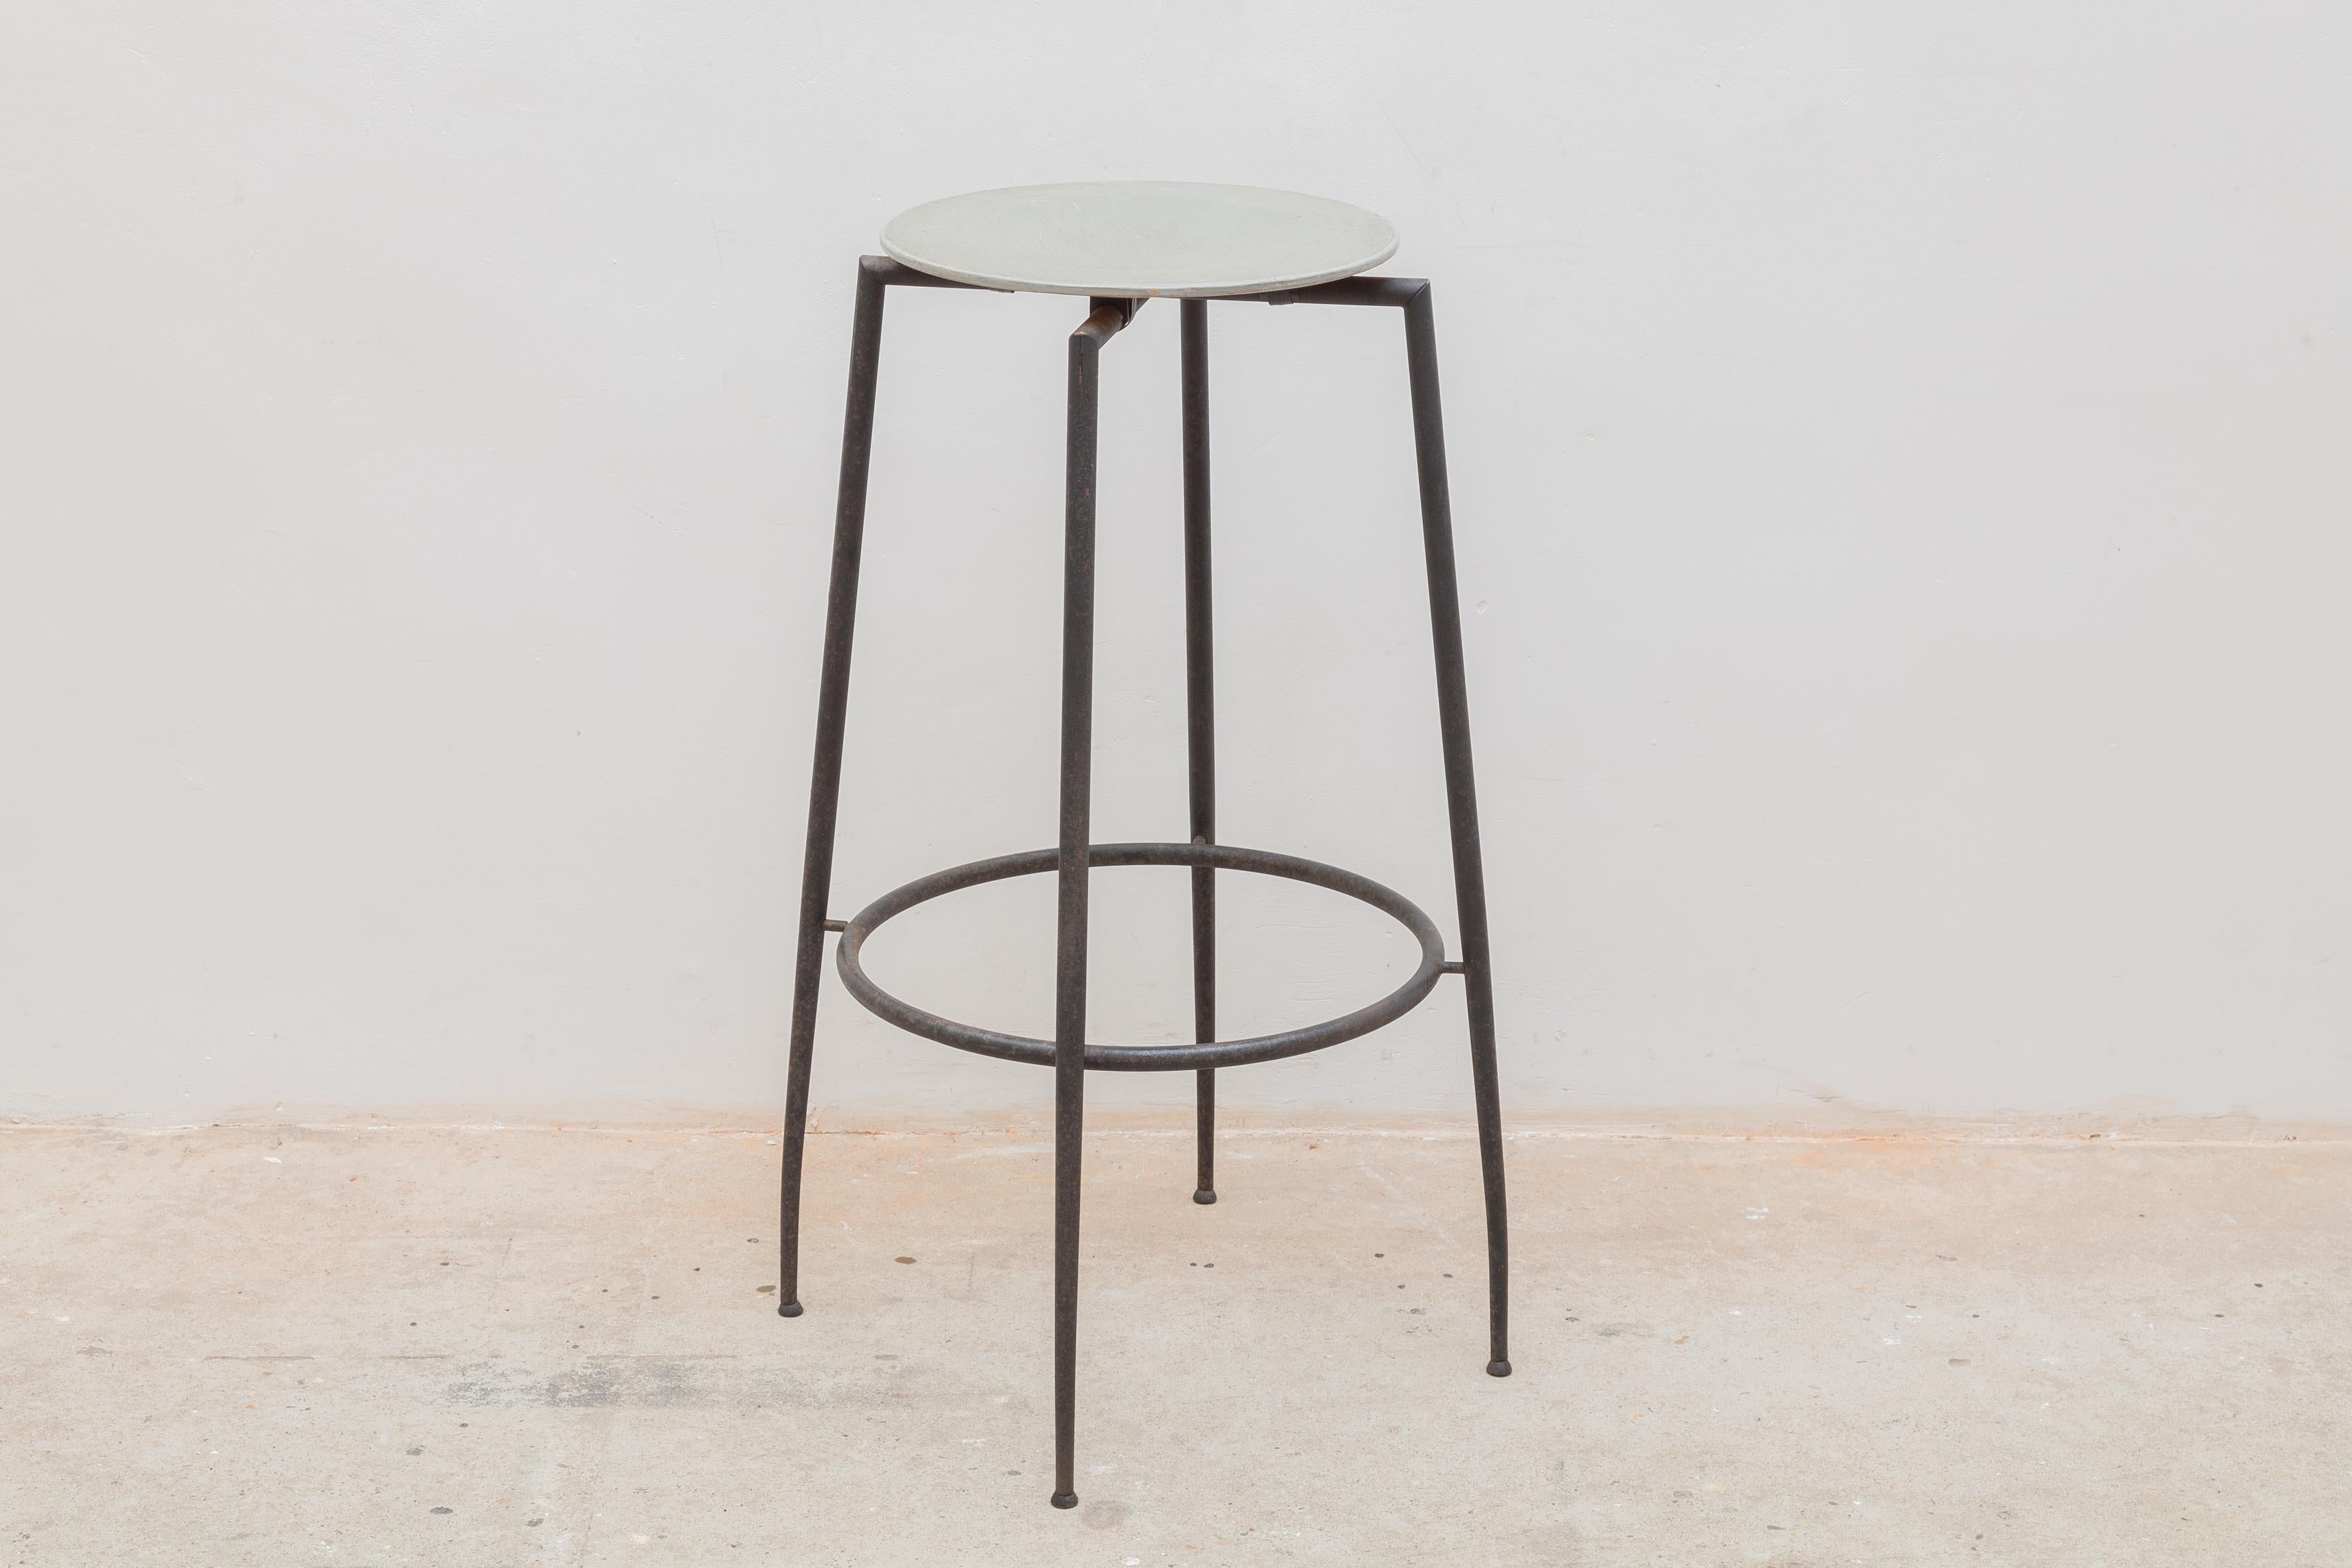 Vintage set of industrial midcentury bar stools Mobelfakta designed by Foraform, Norway, 1980s. Black wrought iron frames with in wood grey painted seats. Vintage patina.

Dimensions: 40 W x 80 H x 40 D cm.